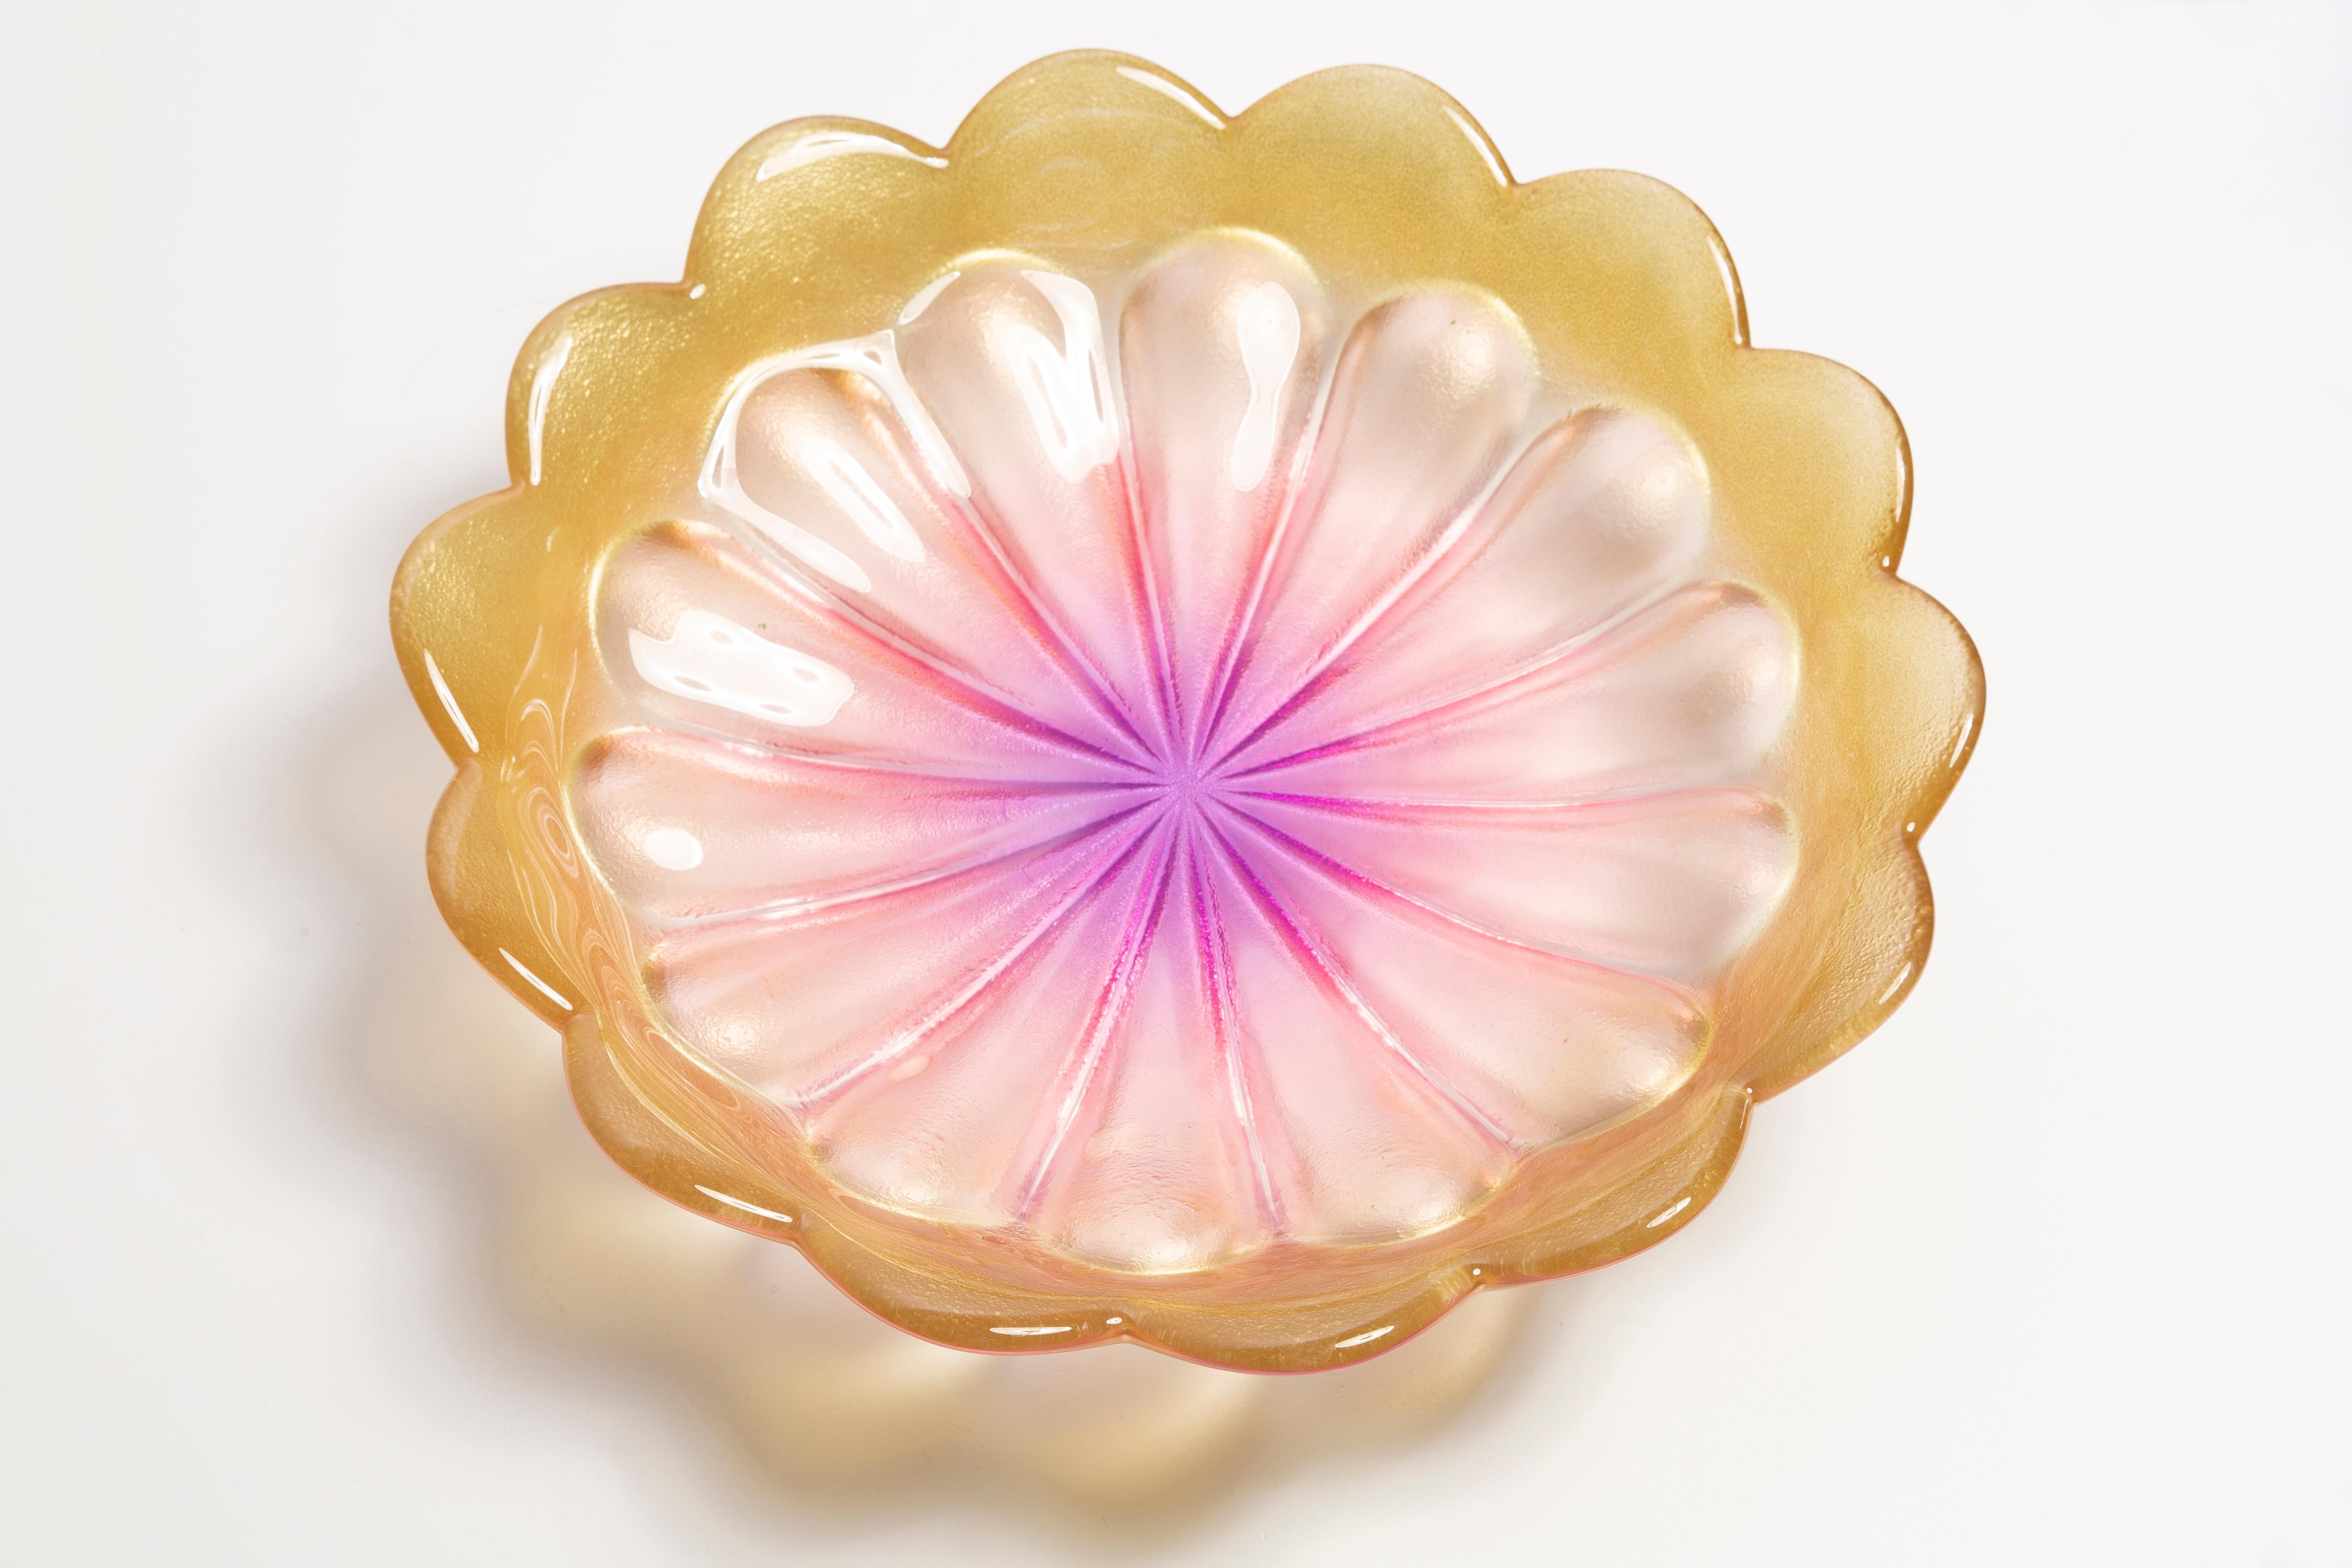 Mid-Century Modern Mid-Century Golden and Pink Decorative Glass Flower Plate, Italy, 1960s For Sale